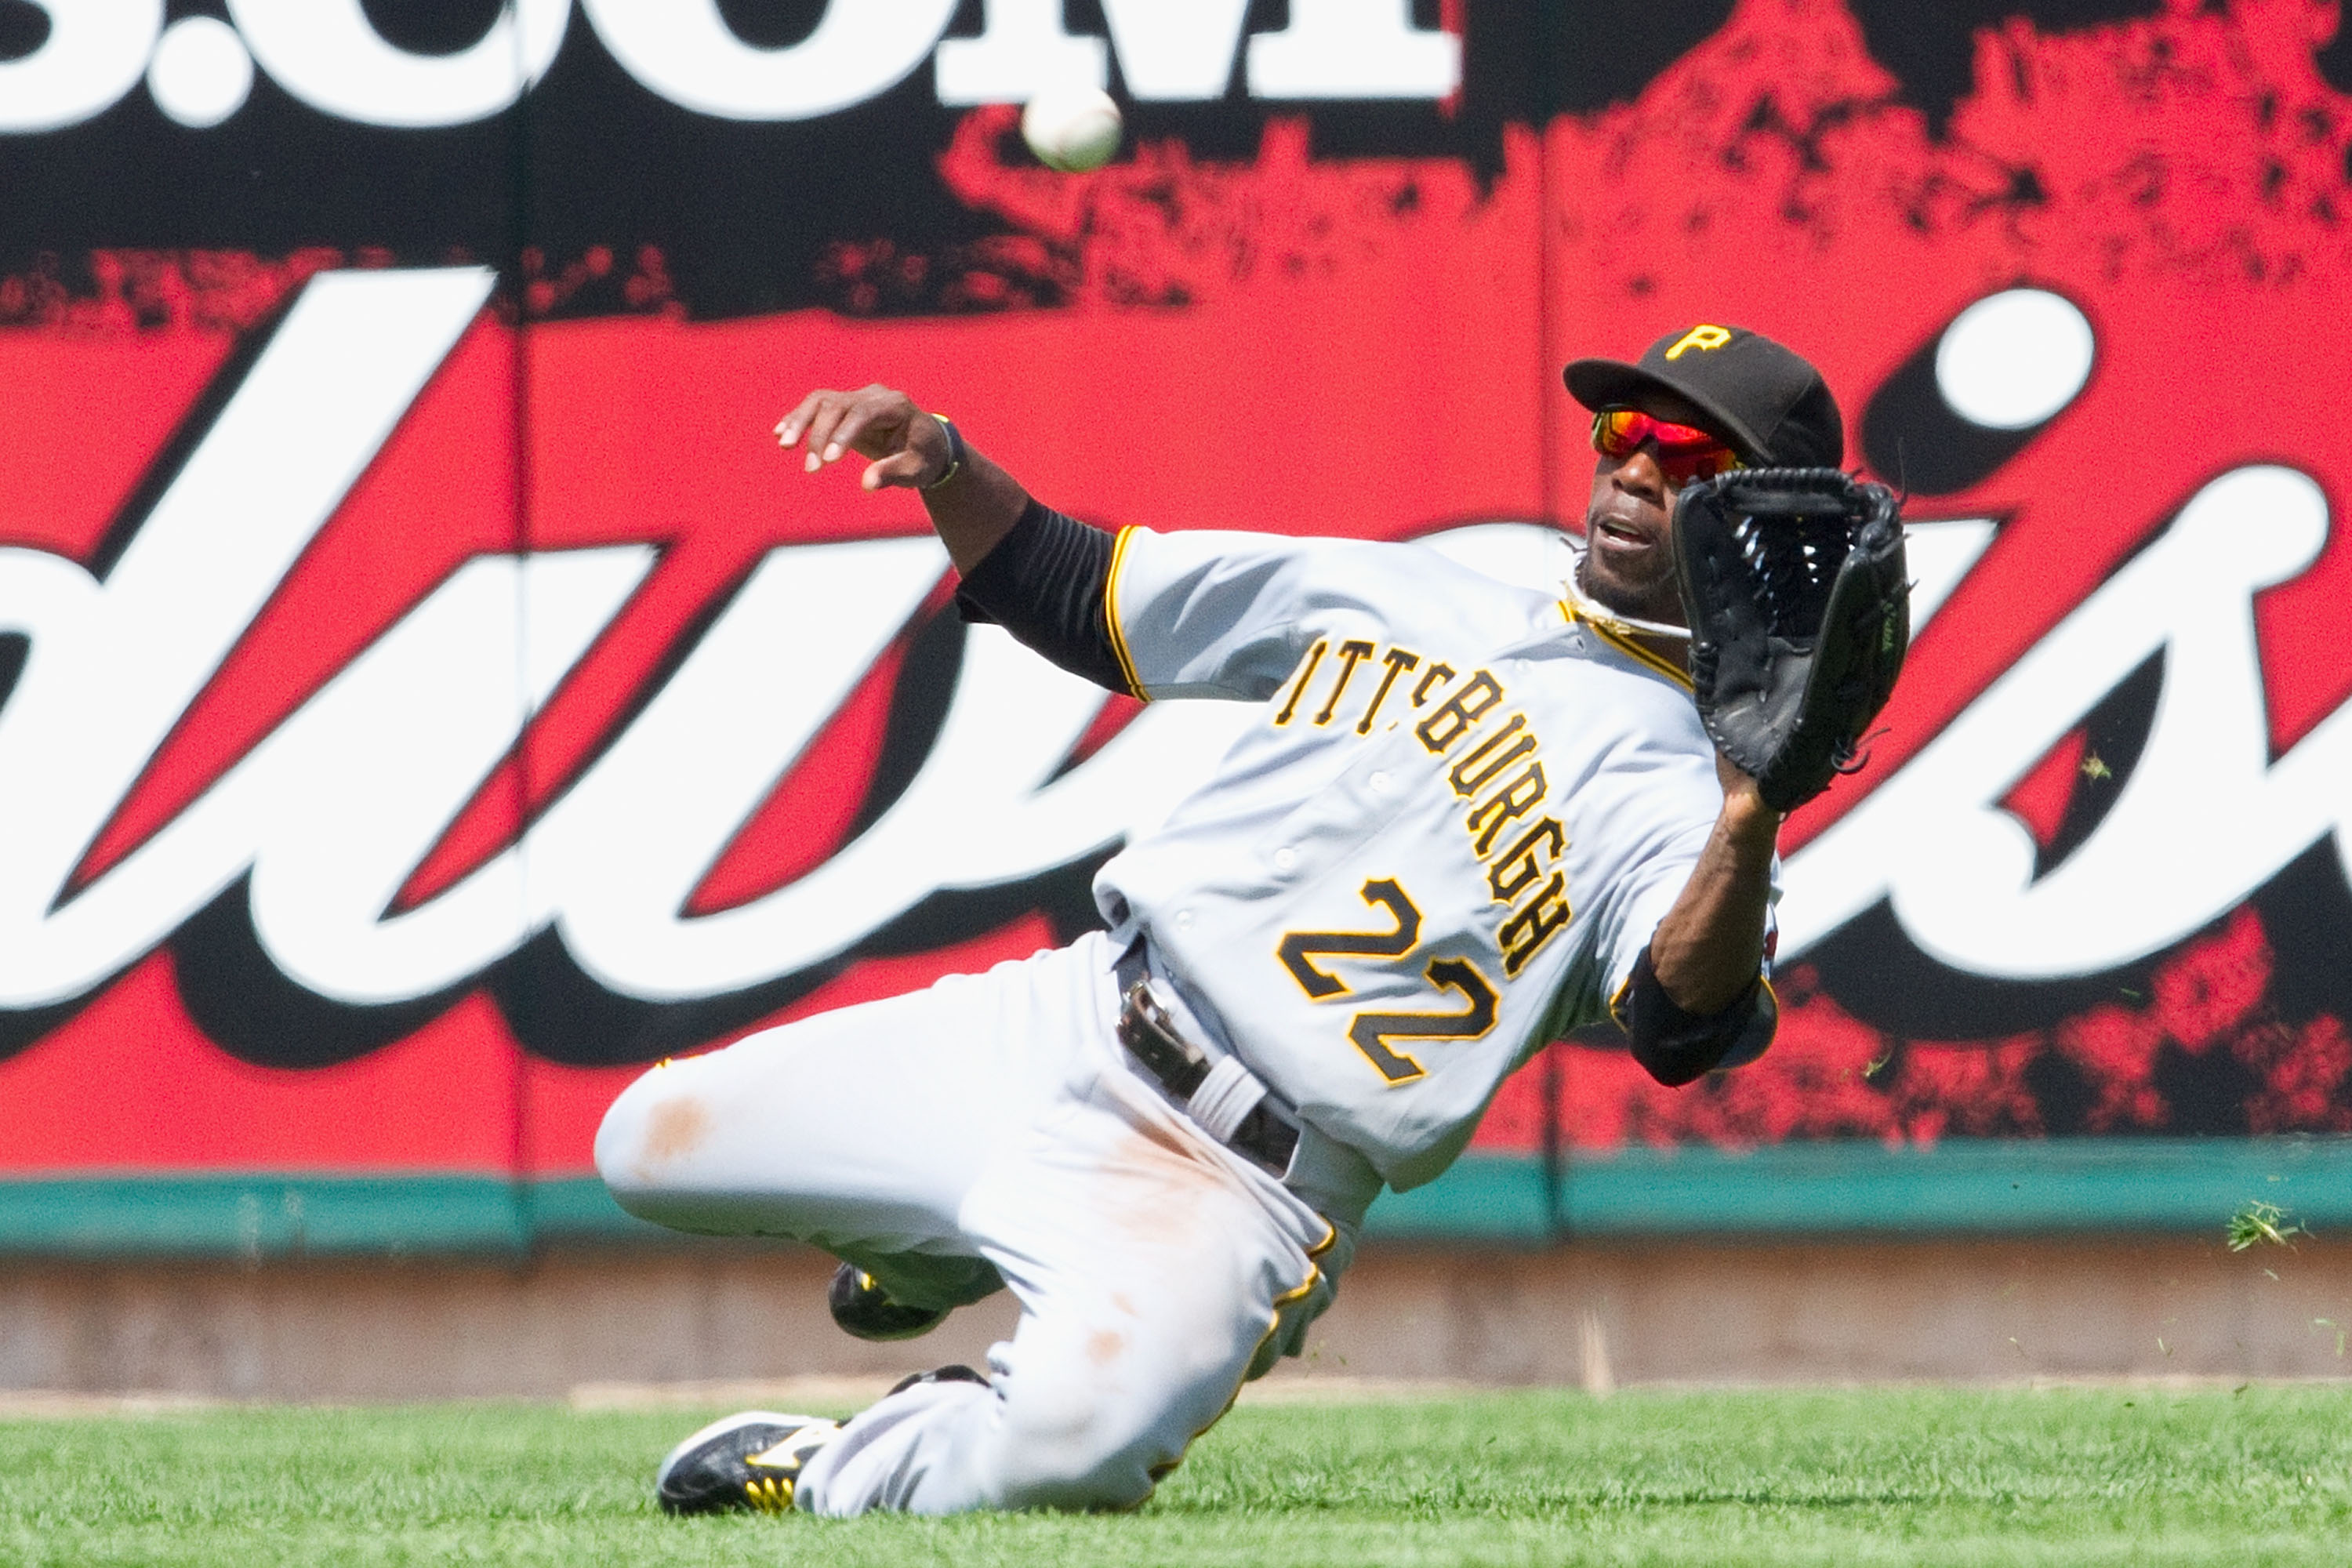 ST. LOUIS - AUGUST 1: Andrew McCutchen of the St. Louis Cardinals fields a fly ball against the Pittsburgh Pirates at Busch Stadium on August 1, 2010 in St. Louis, Missouri.  The Cardinals beat the Pirates 9-1.  (Photo by Dilip Vishwanat/Getty Images)